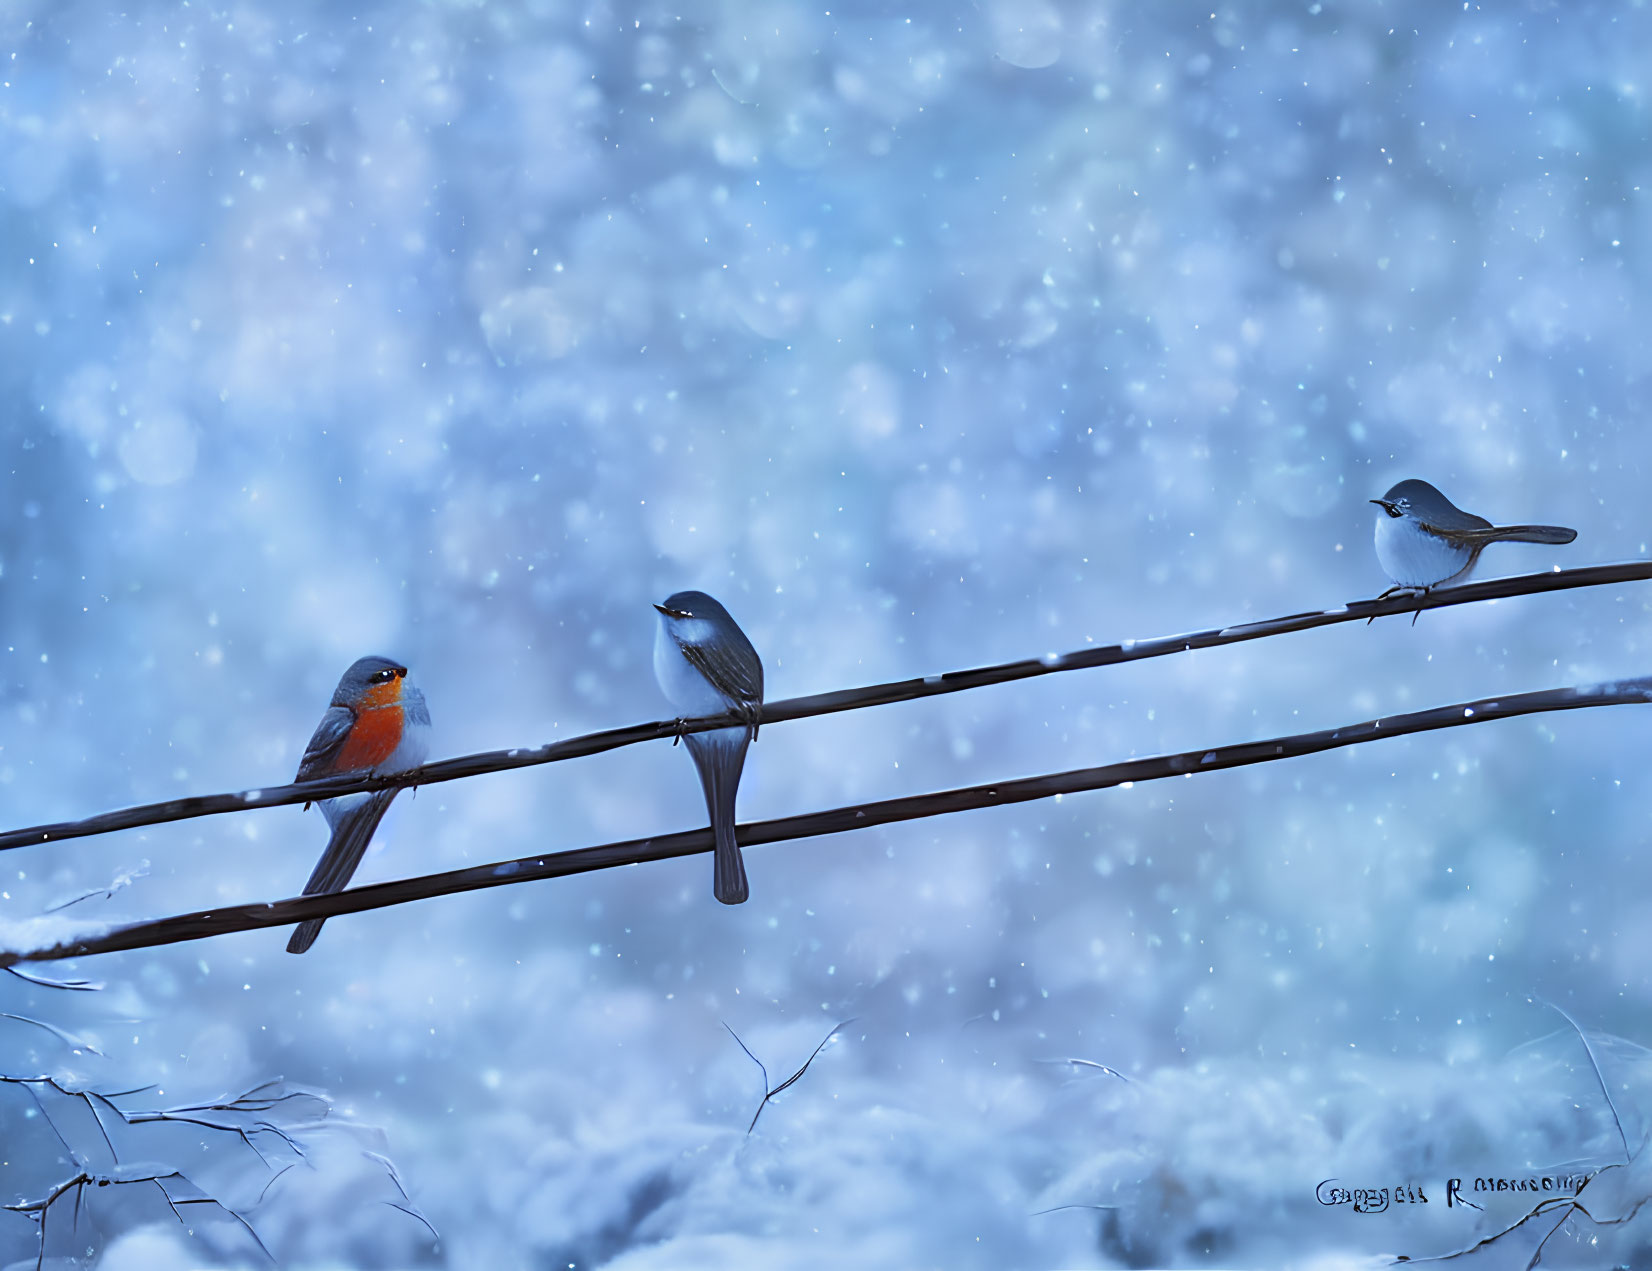 Three Birds Perched on Wire in Snowfall on Soft Blue Winter Background